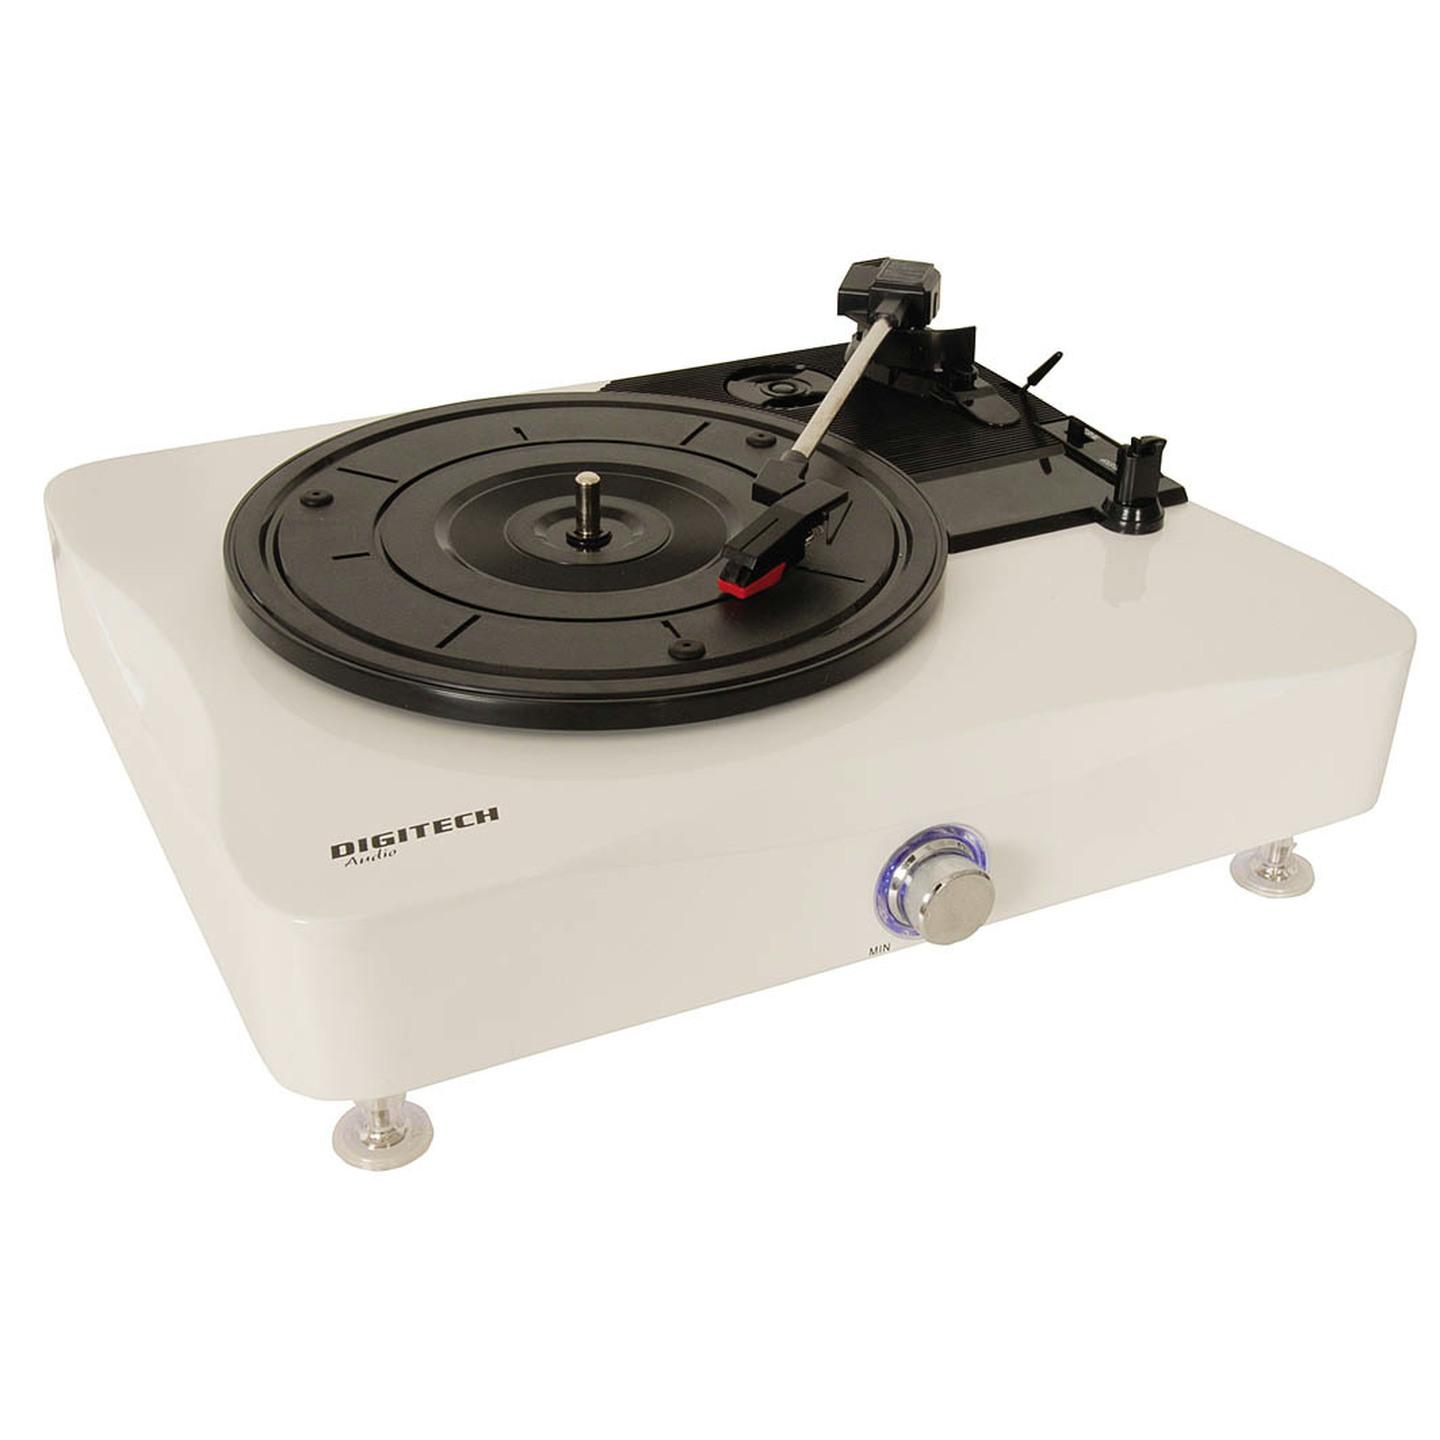 USB Turntable with Amp